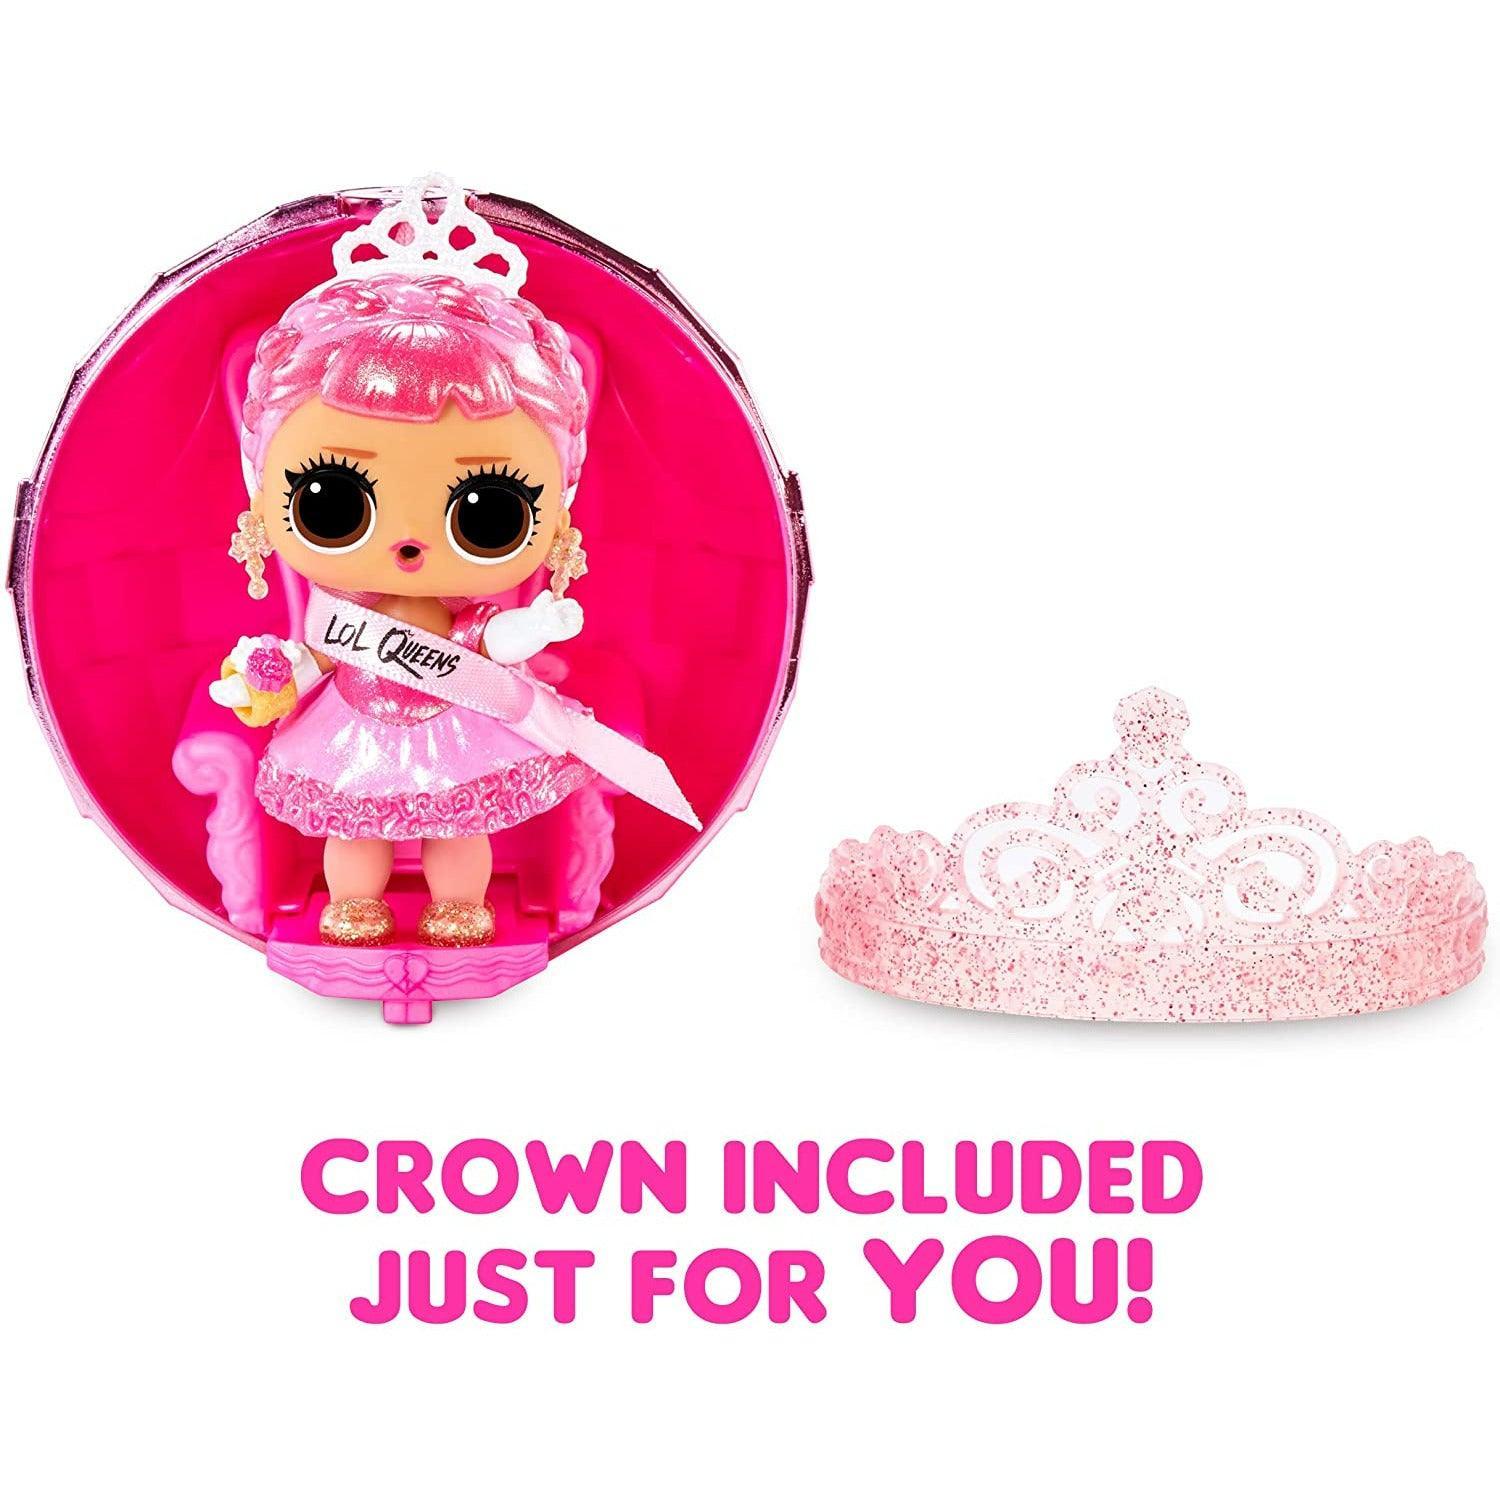 LOL Surprise OMG Queens Dolls with 9 Surprises Including Doll, Fashions, and Royal Themed Accessories - BumbleToys - 5-7 Years, Dolls, Fashion Dolls & Accessories, Girls, L.O.L, OXE, Pre-Order